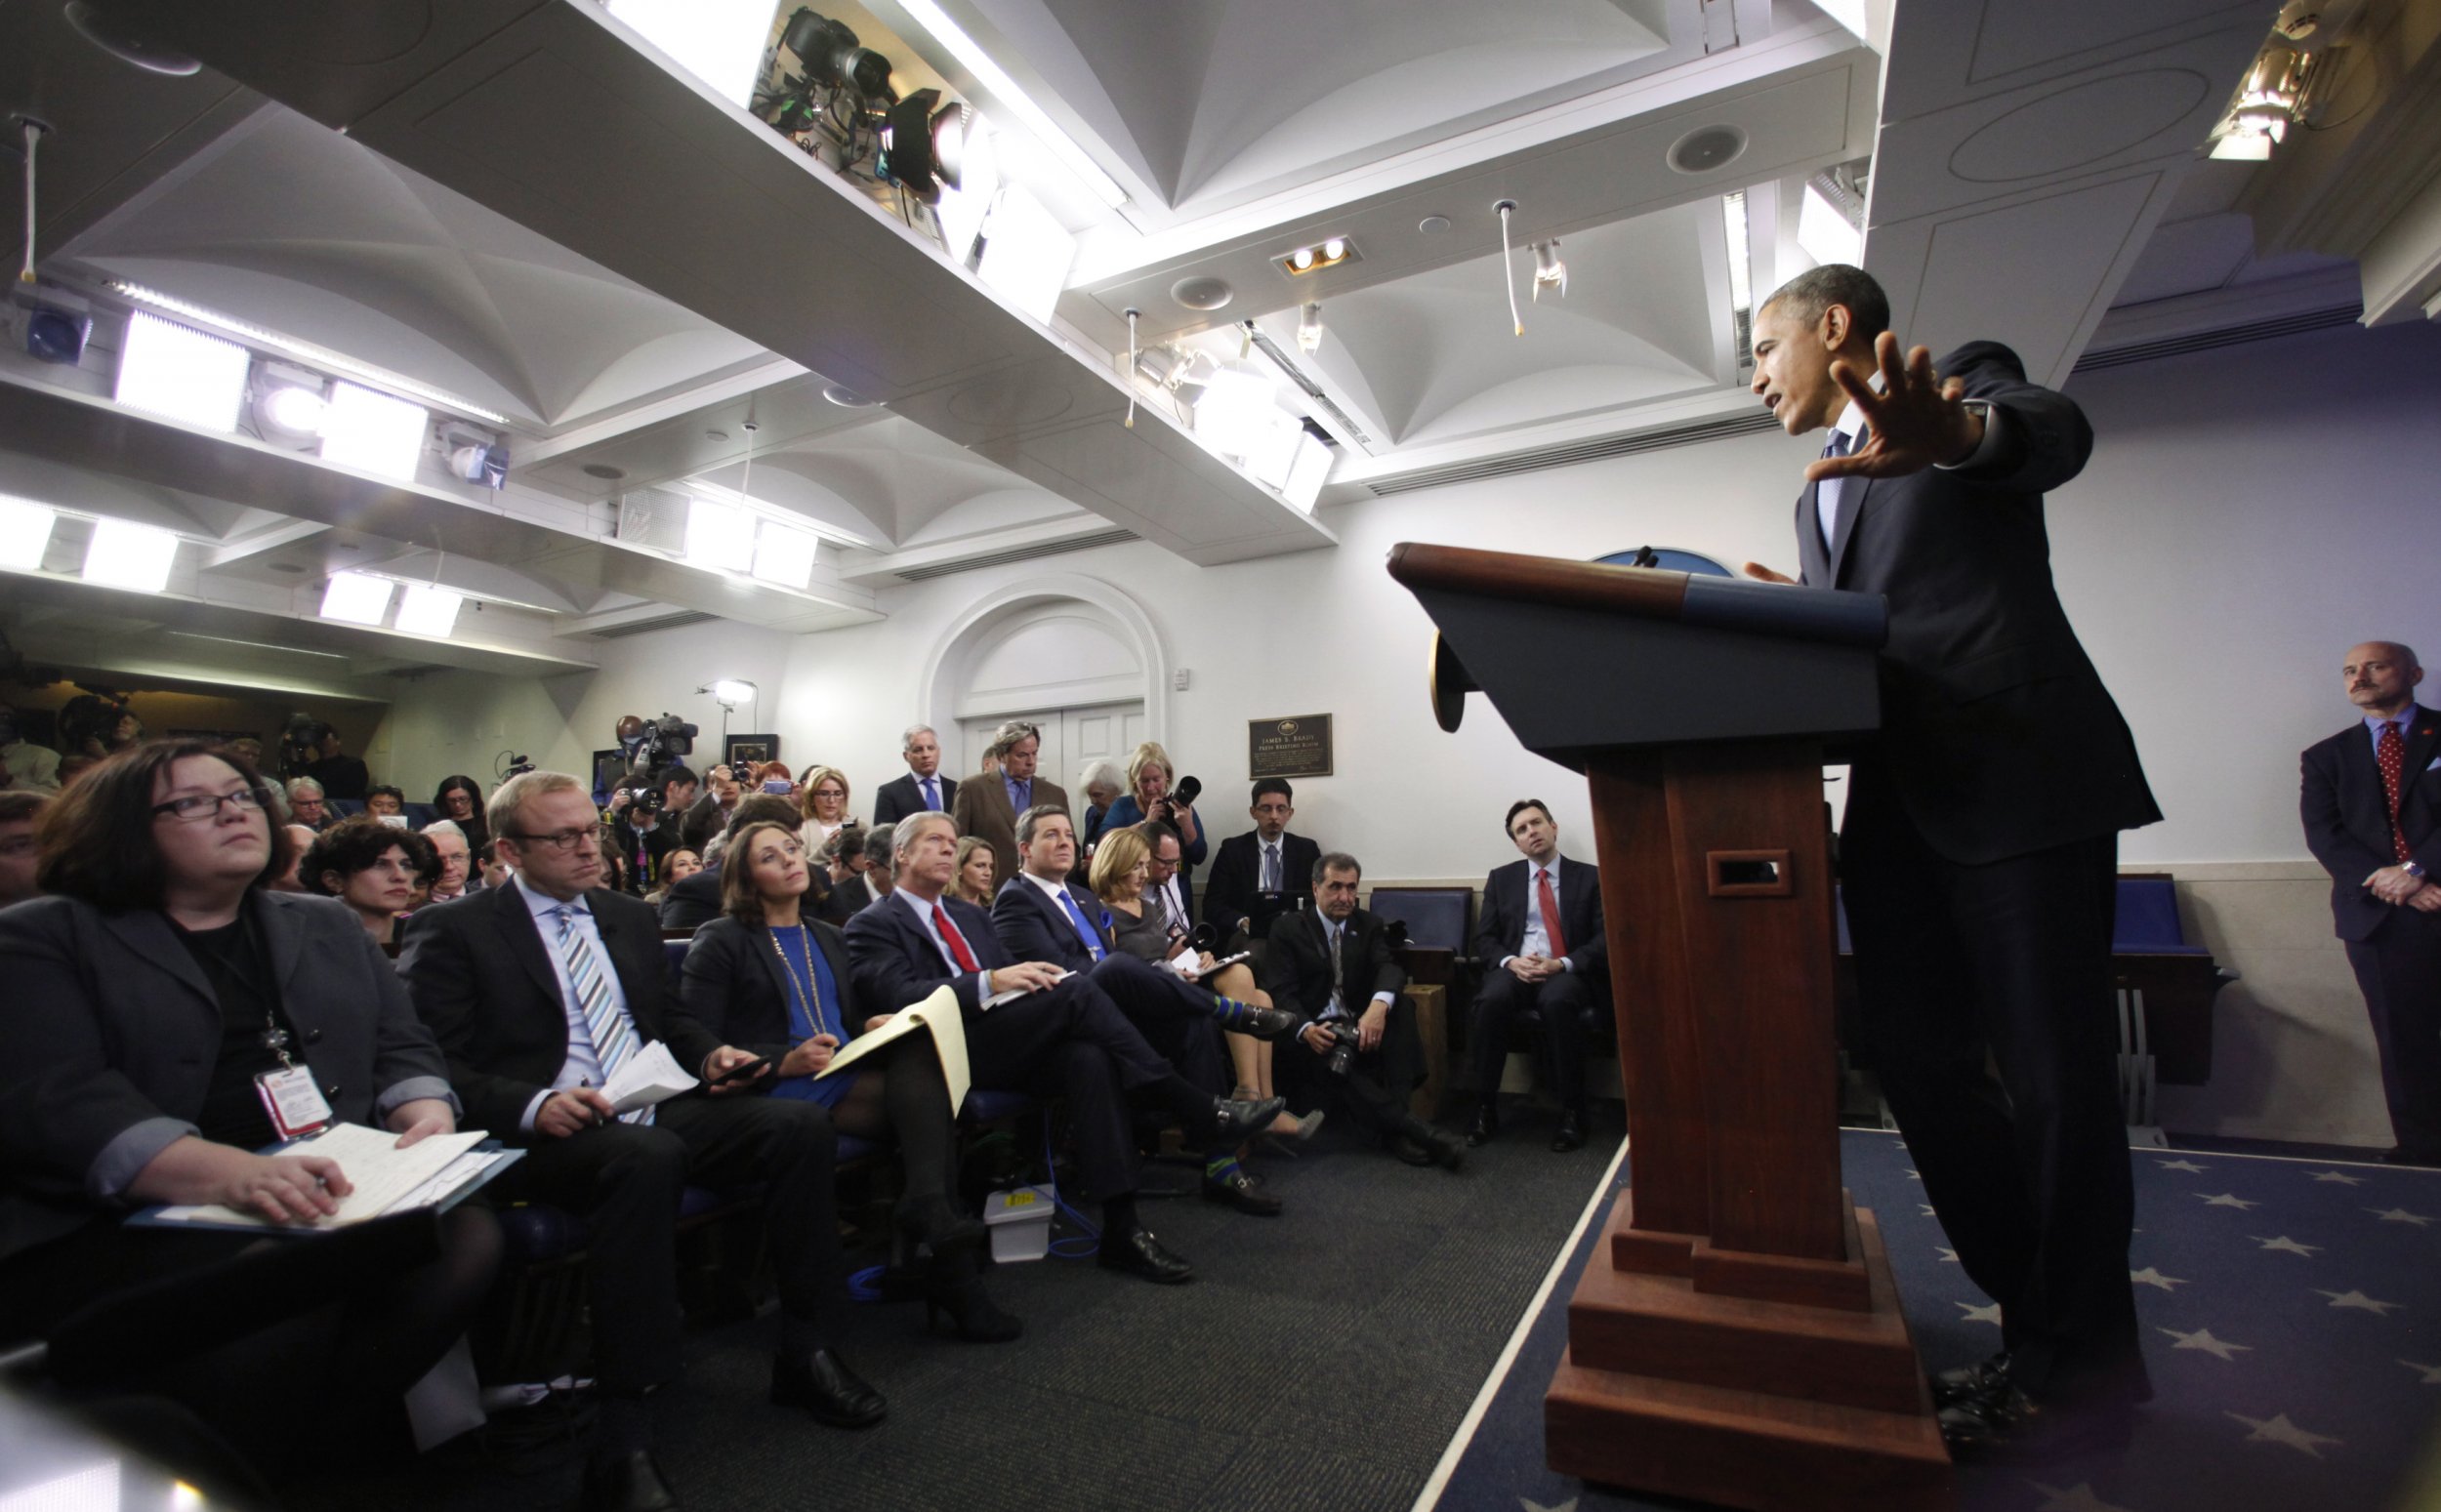 President Obama's Year-End News Conference